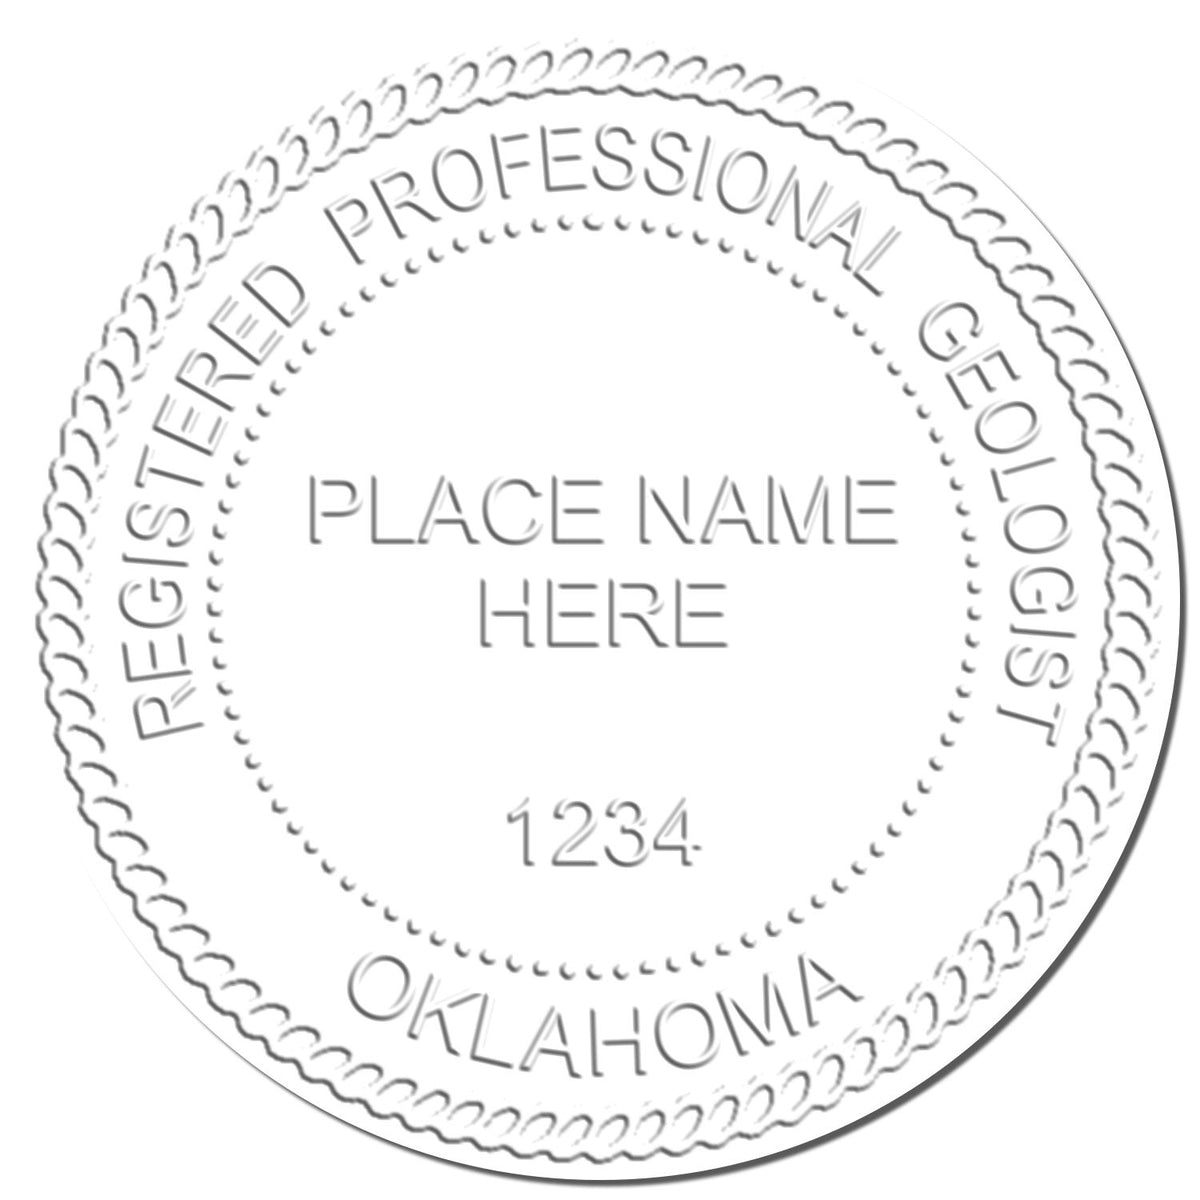 The Oklahoma Geologist Desk Seal stamp impression comes to life with a crisp, detailed image stamped on paper - showcasing true professional quality.